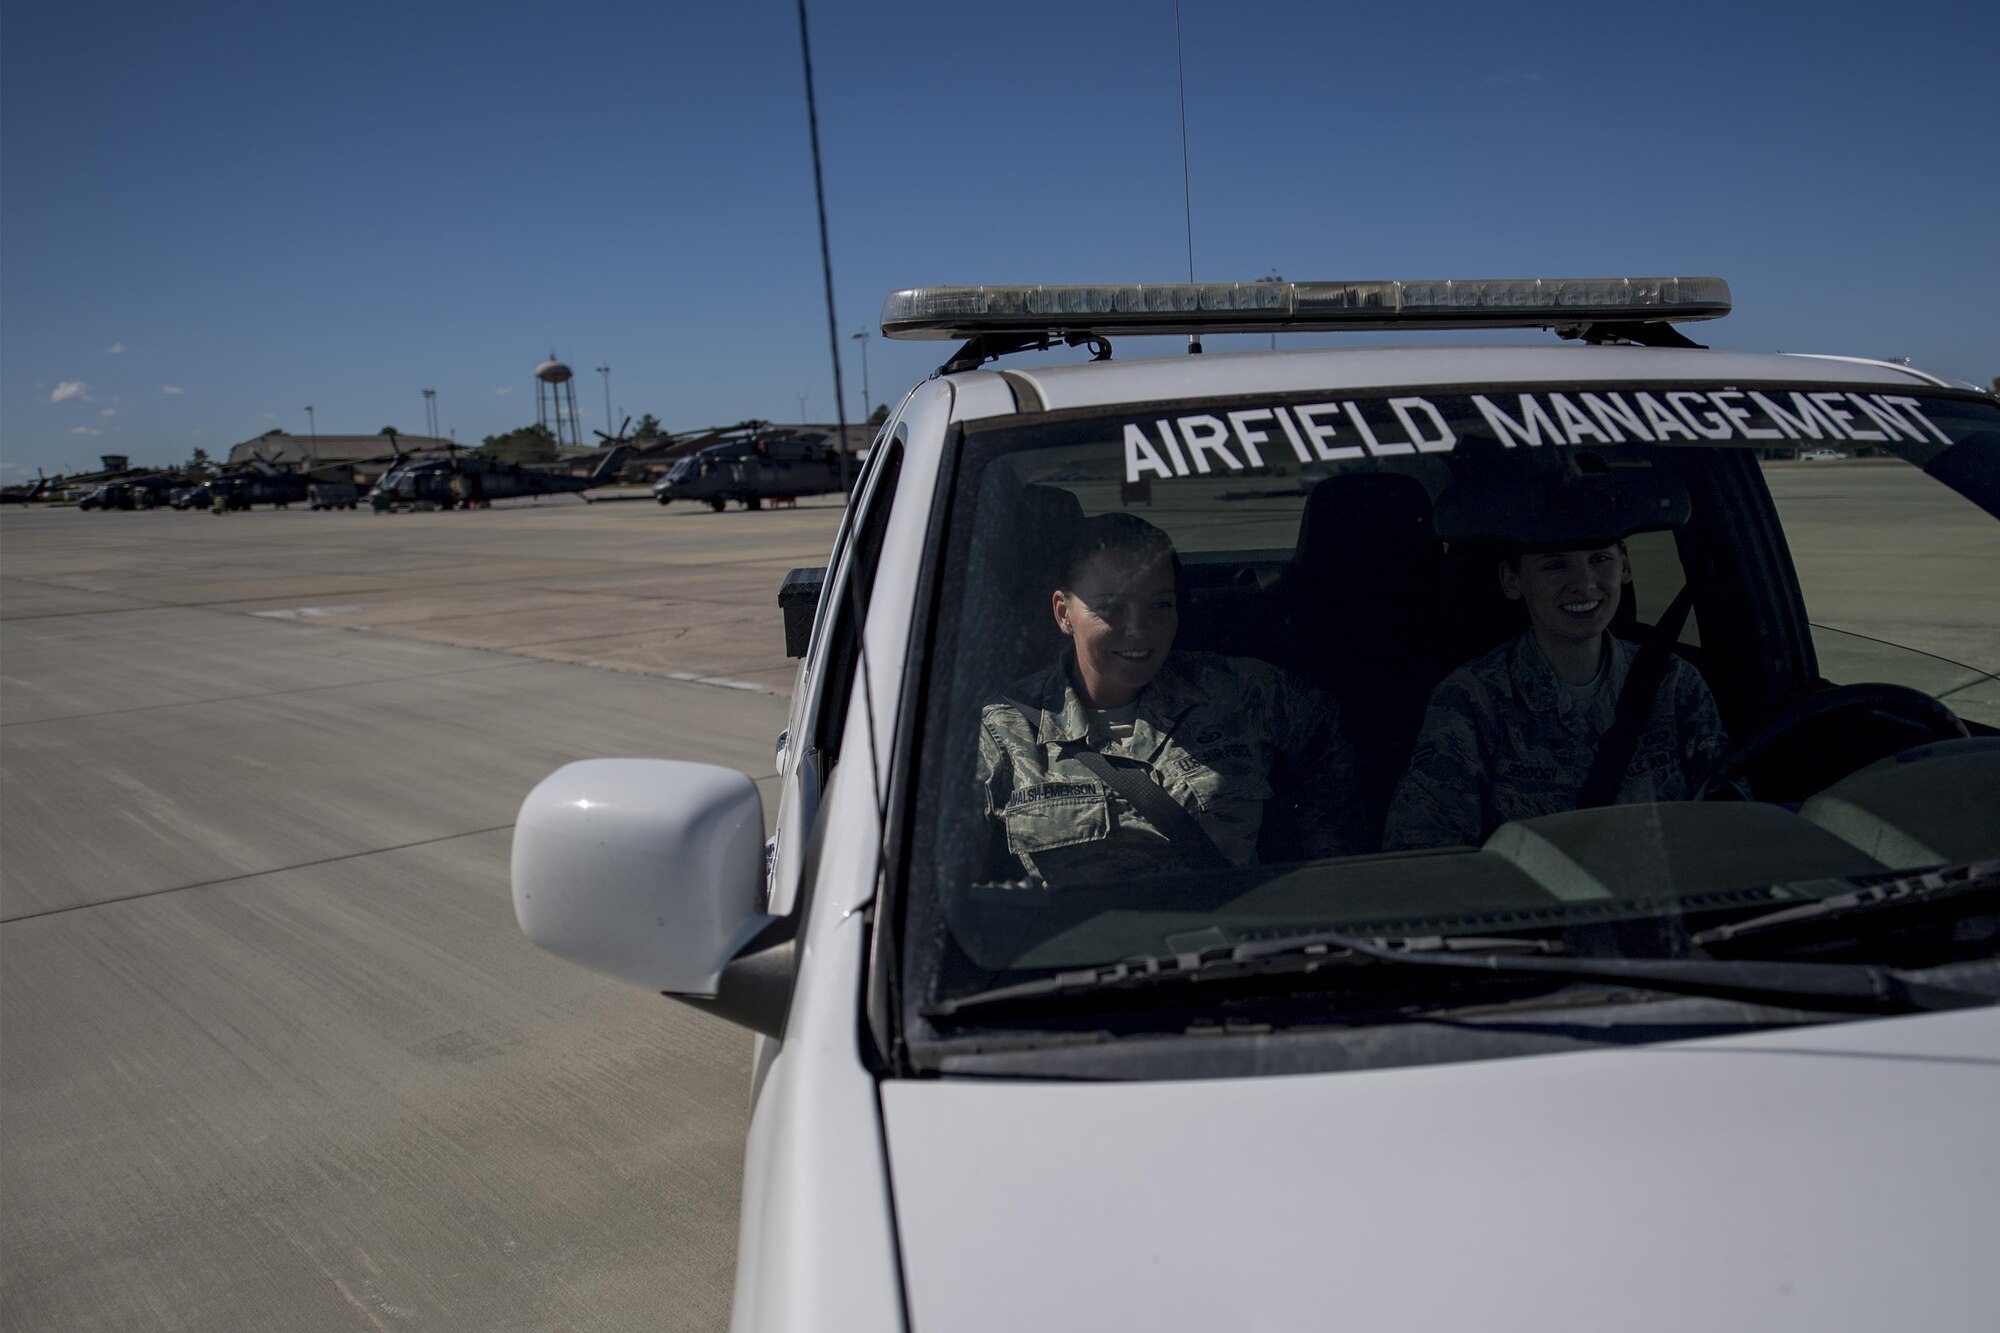 Tech. Sgt. Shannon Walsh, left, 23d Operations Support Squadron NCO in charge of airfield management operations and Senior Airman Kelsey Seroogy, right, 23d OSS airfield management shift leader, drive past multiple HH-60G Pave Hawks, Oct. 19, 2016 at Moody Air Force Base, Ga. The 23d OSS’s airfield management section is responsible for the upkeep of runways and other airfield components. (U.S. Air Force photo by Airman 1st Class Daniel Snider)